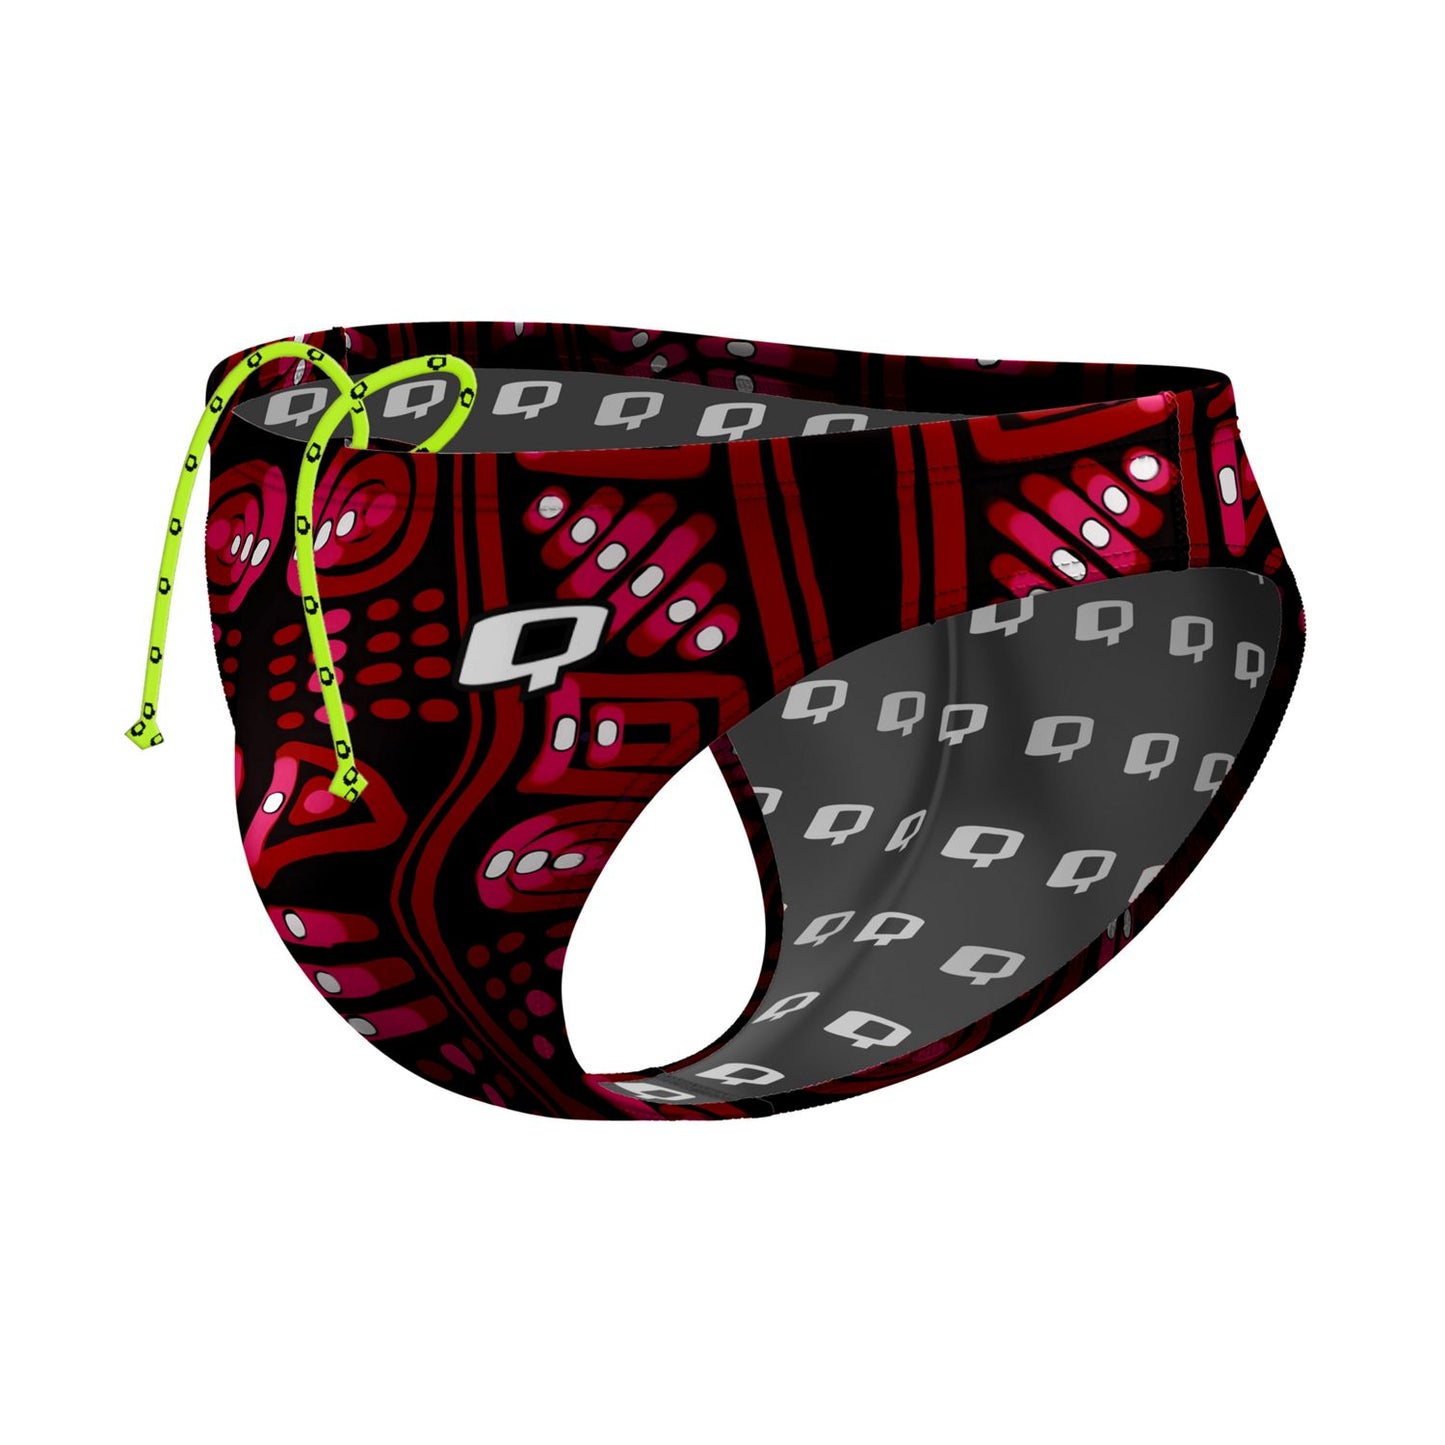 Red Mud Waterpolo Brief